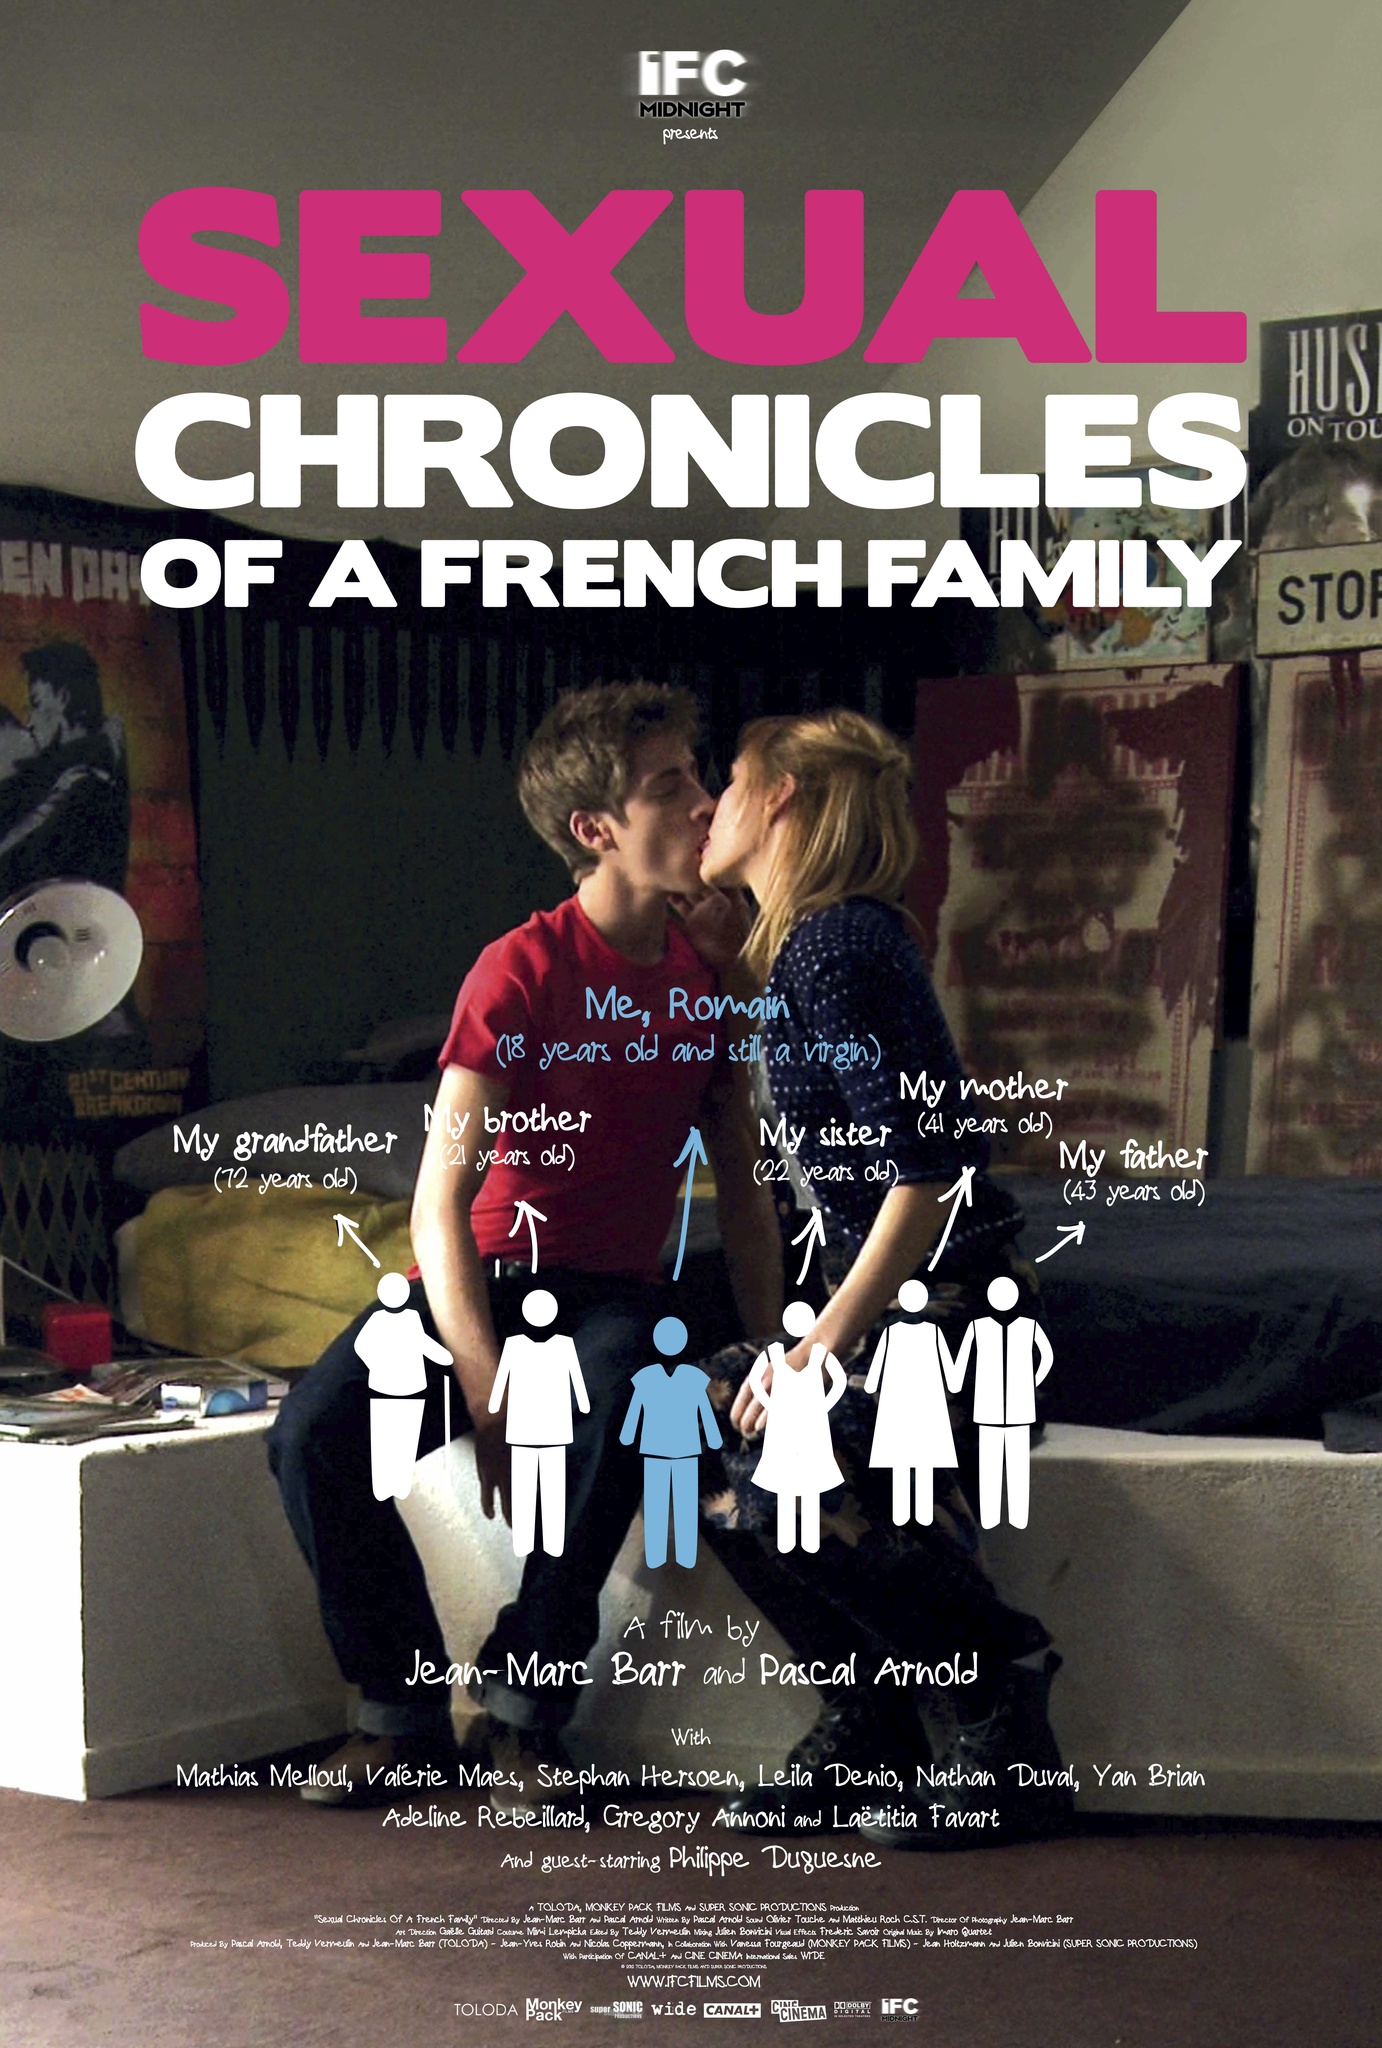 Sexual Chronicles of a French Family (2012) Cenas de Nudez